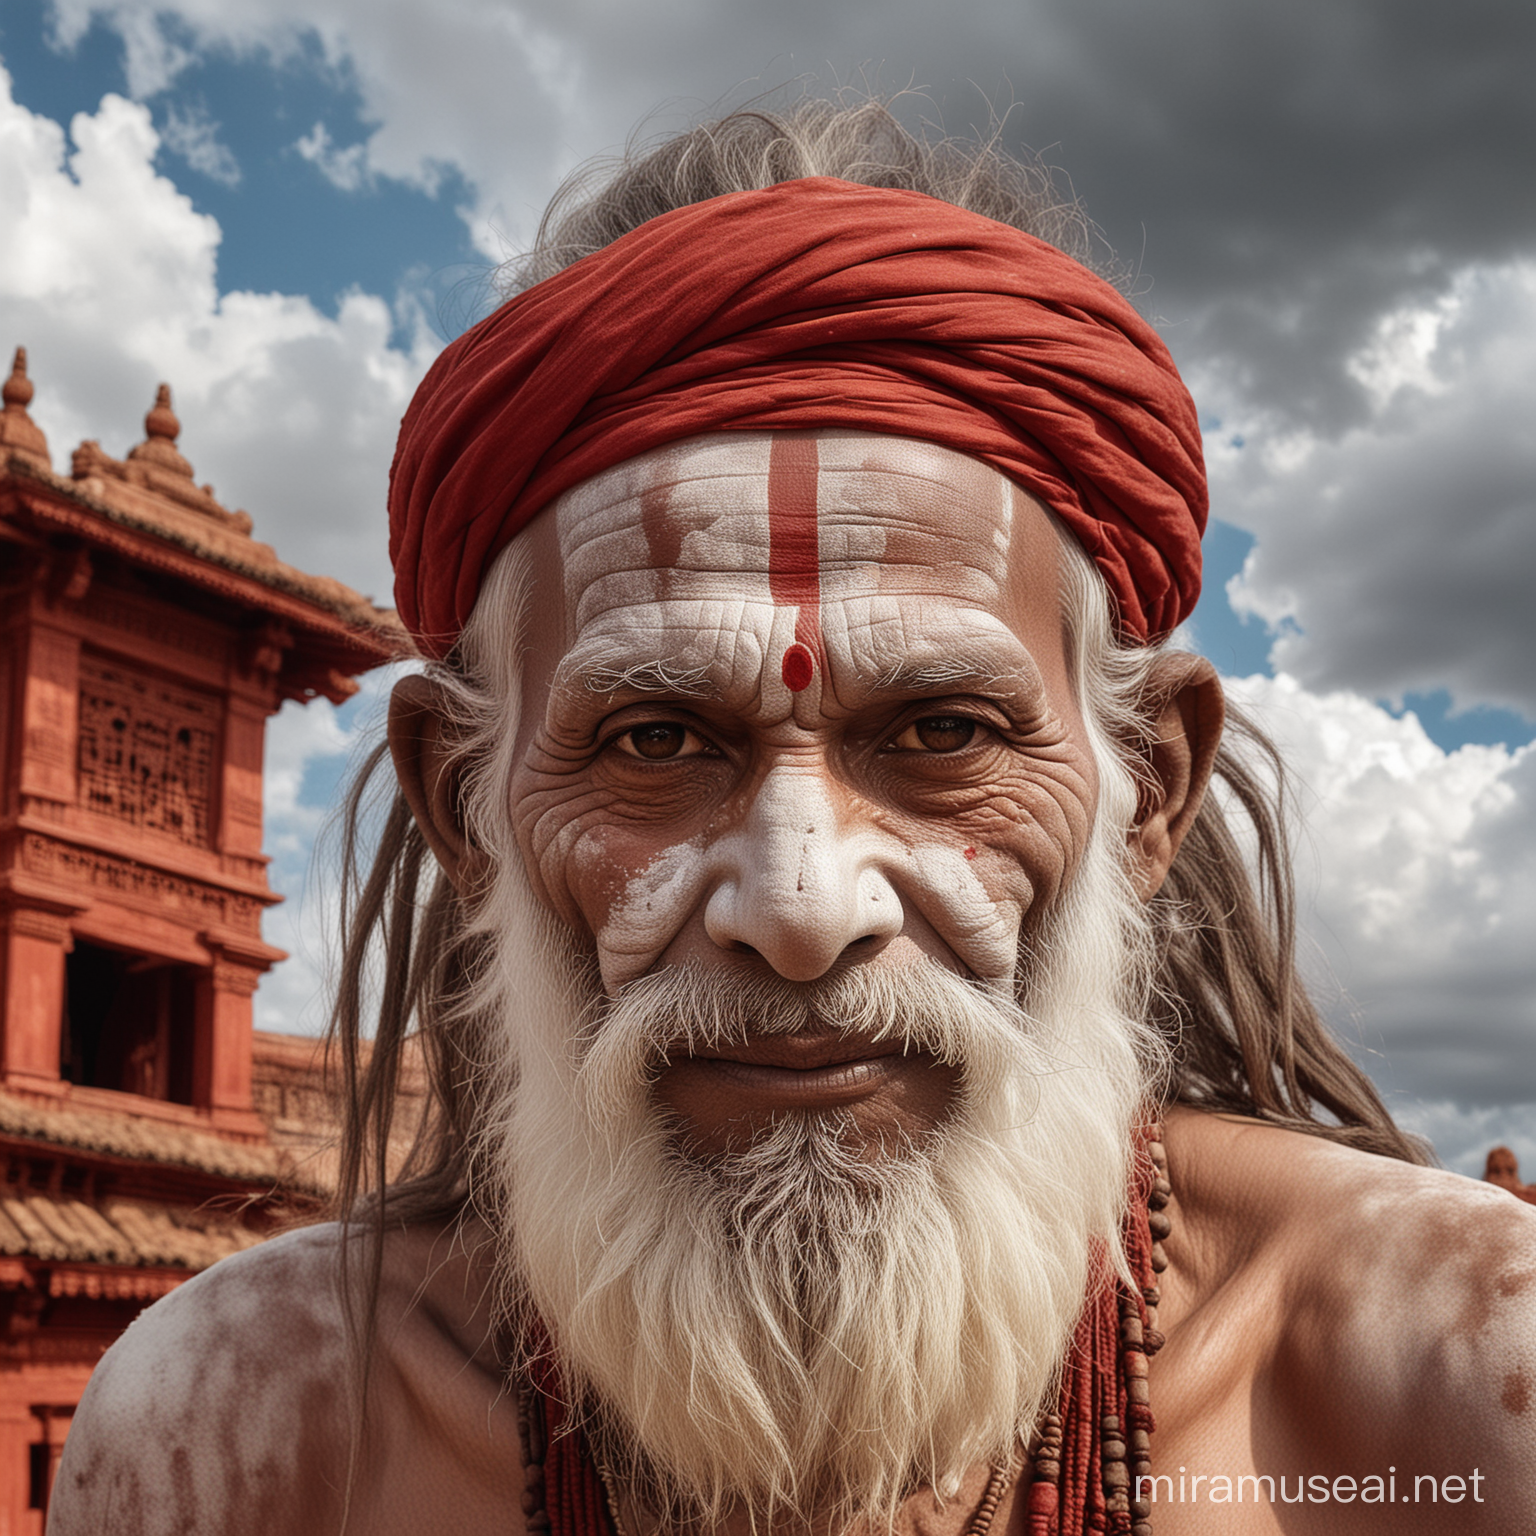  Old and skinnySadhu white painted face and skin is standing before old red tempel rajasthan by cloudy sky fotorealistisch fuji xt3 detailted